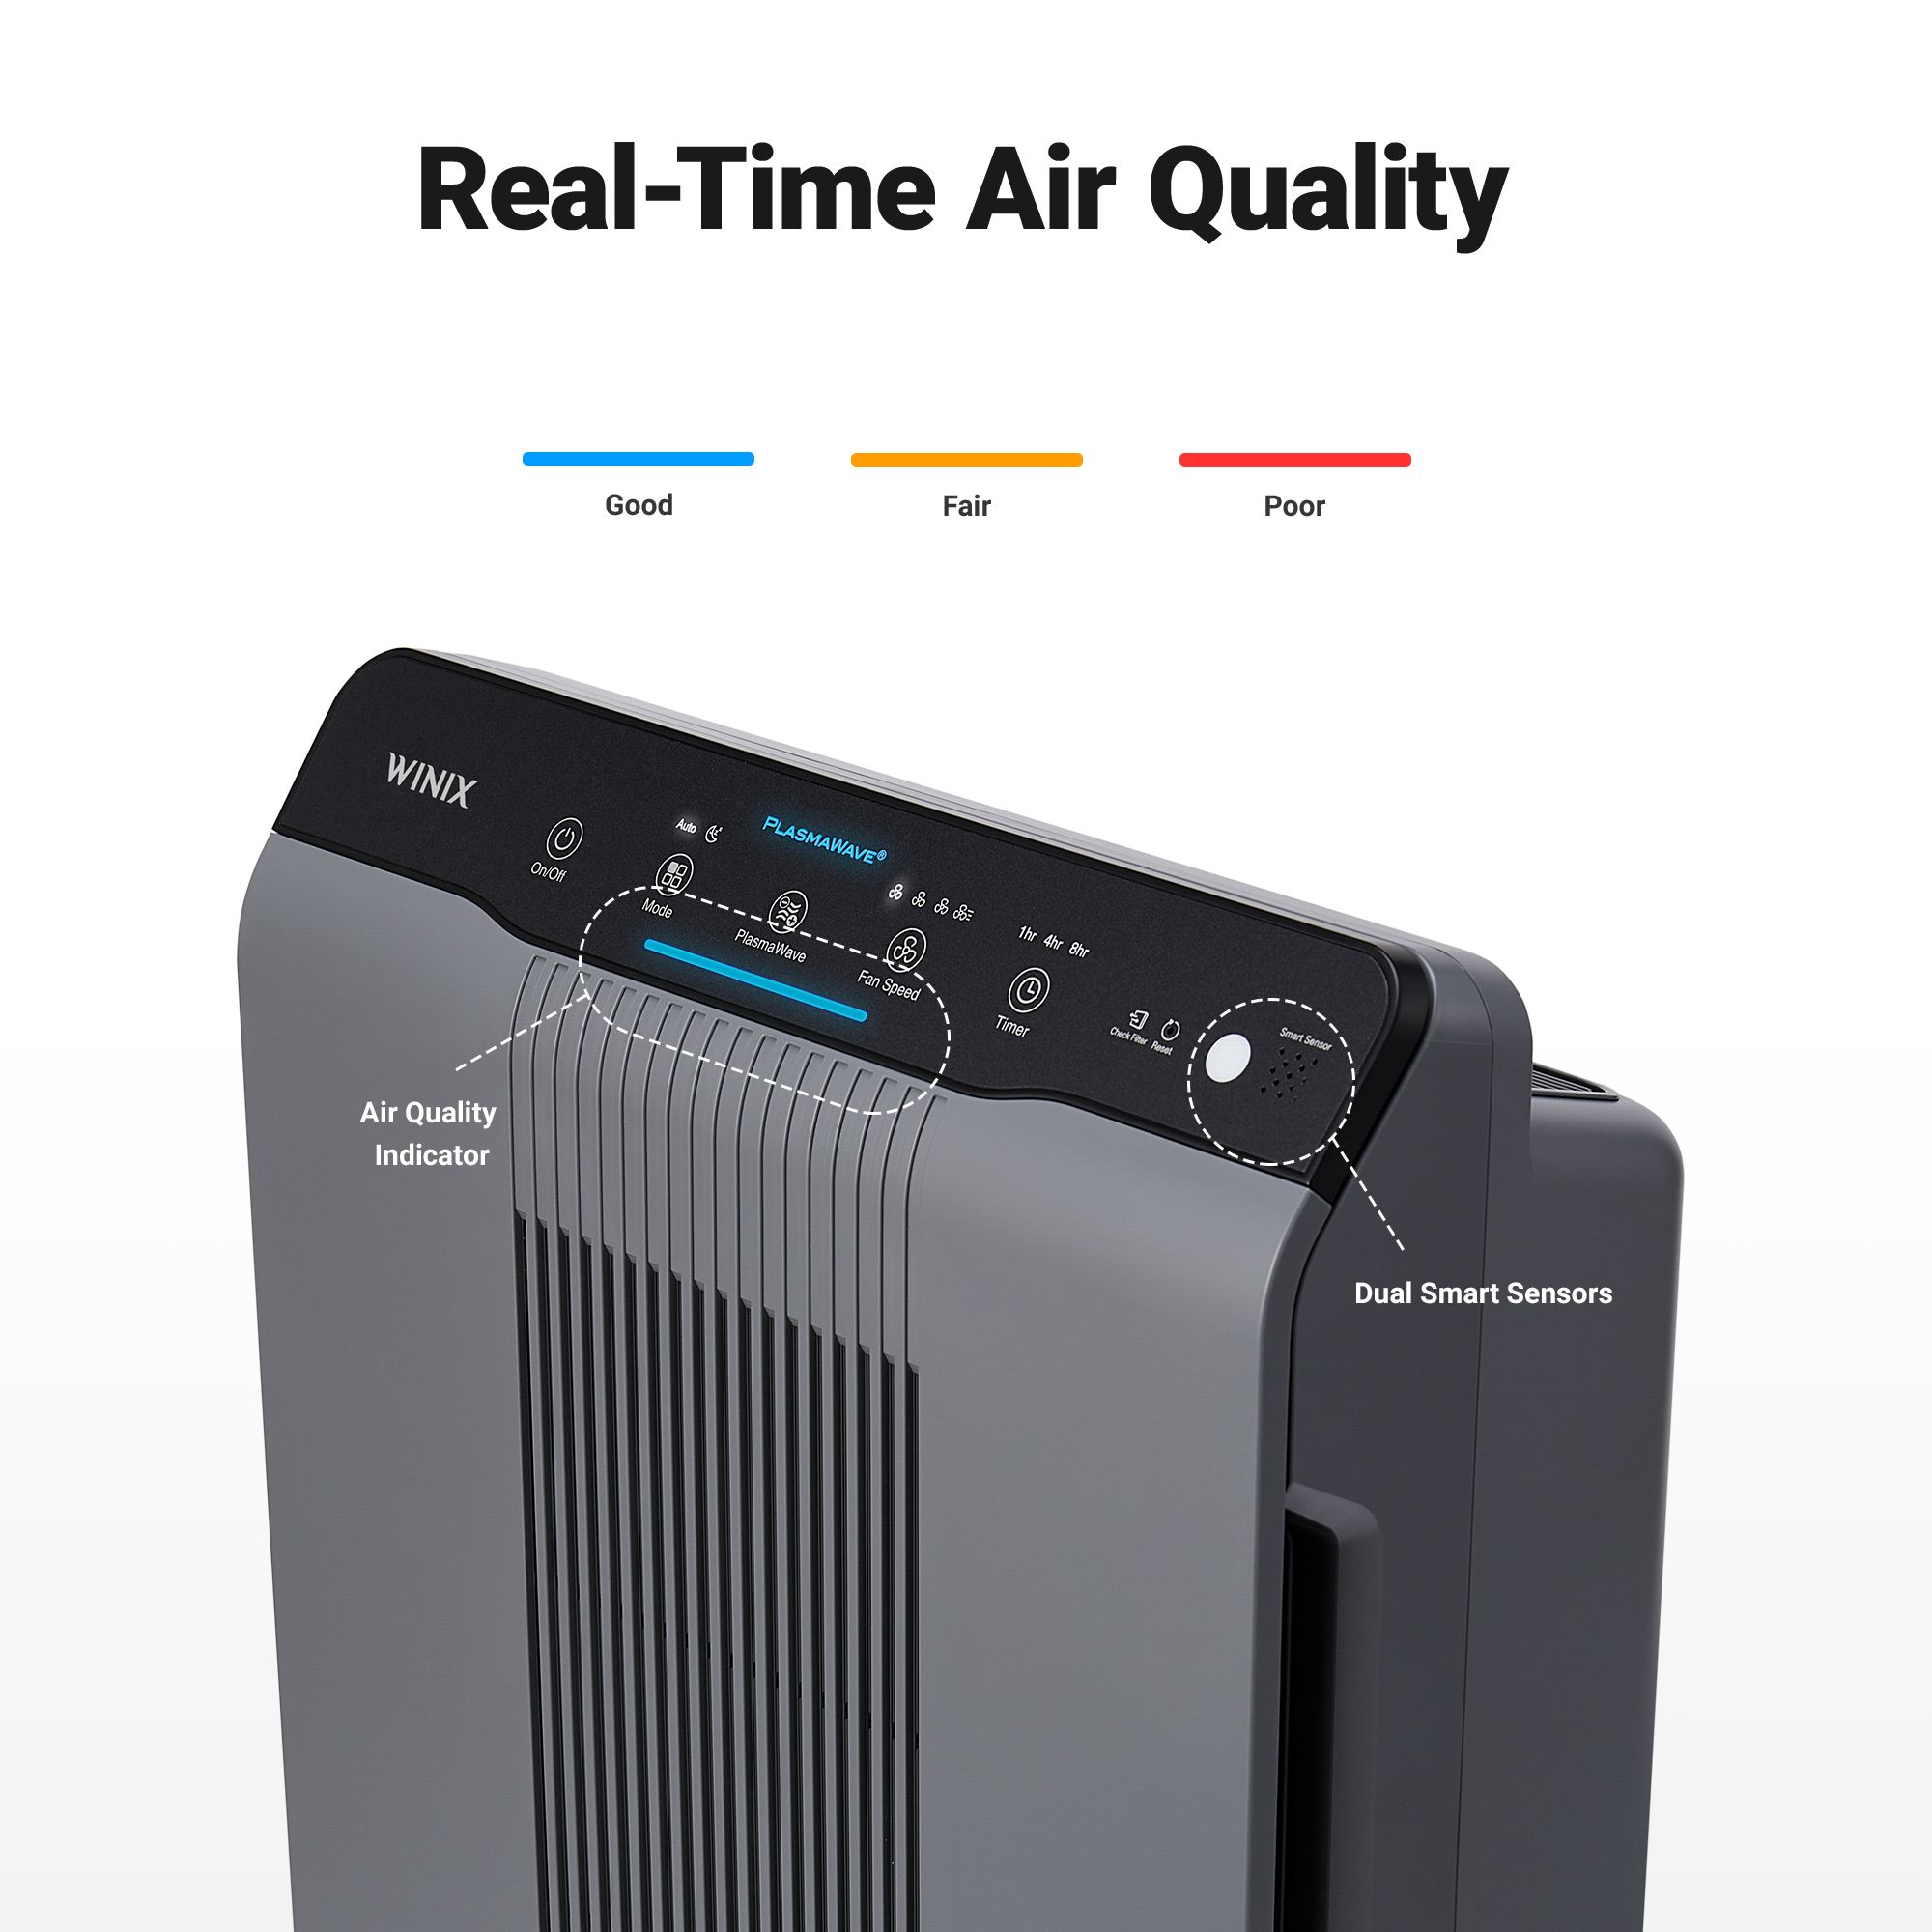 Winix 5300-2 True HEPA 4-Stage Air Purifier with PlasmaWave Technology, AHAM Verified for 5 air changes per hour for 360 square feet - image 4 of 9